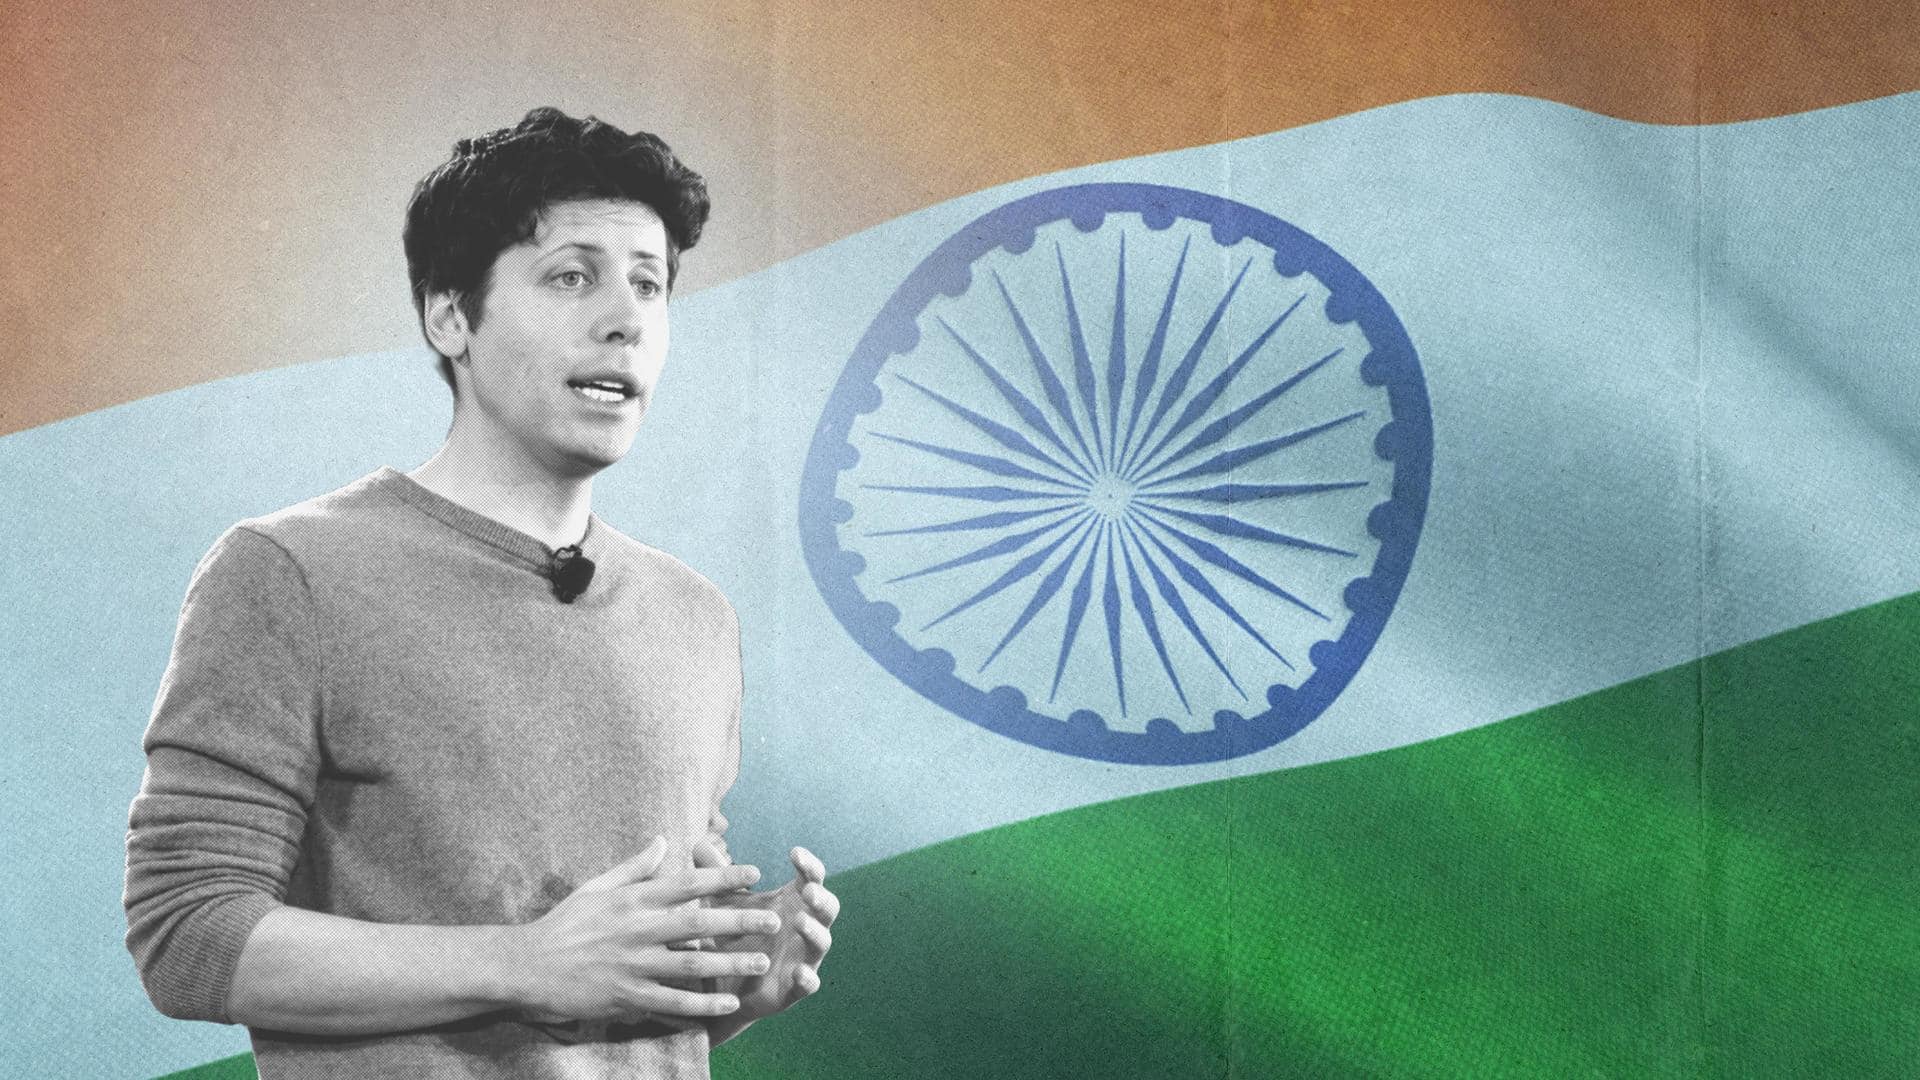 Sam Altman's comment on India's AI capability: How Indians reacted